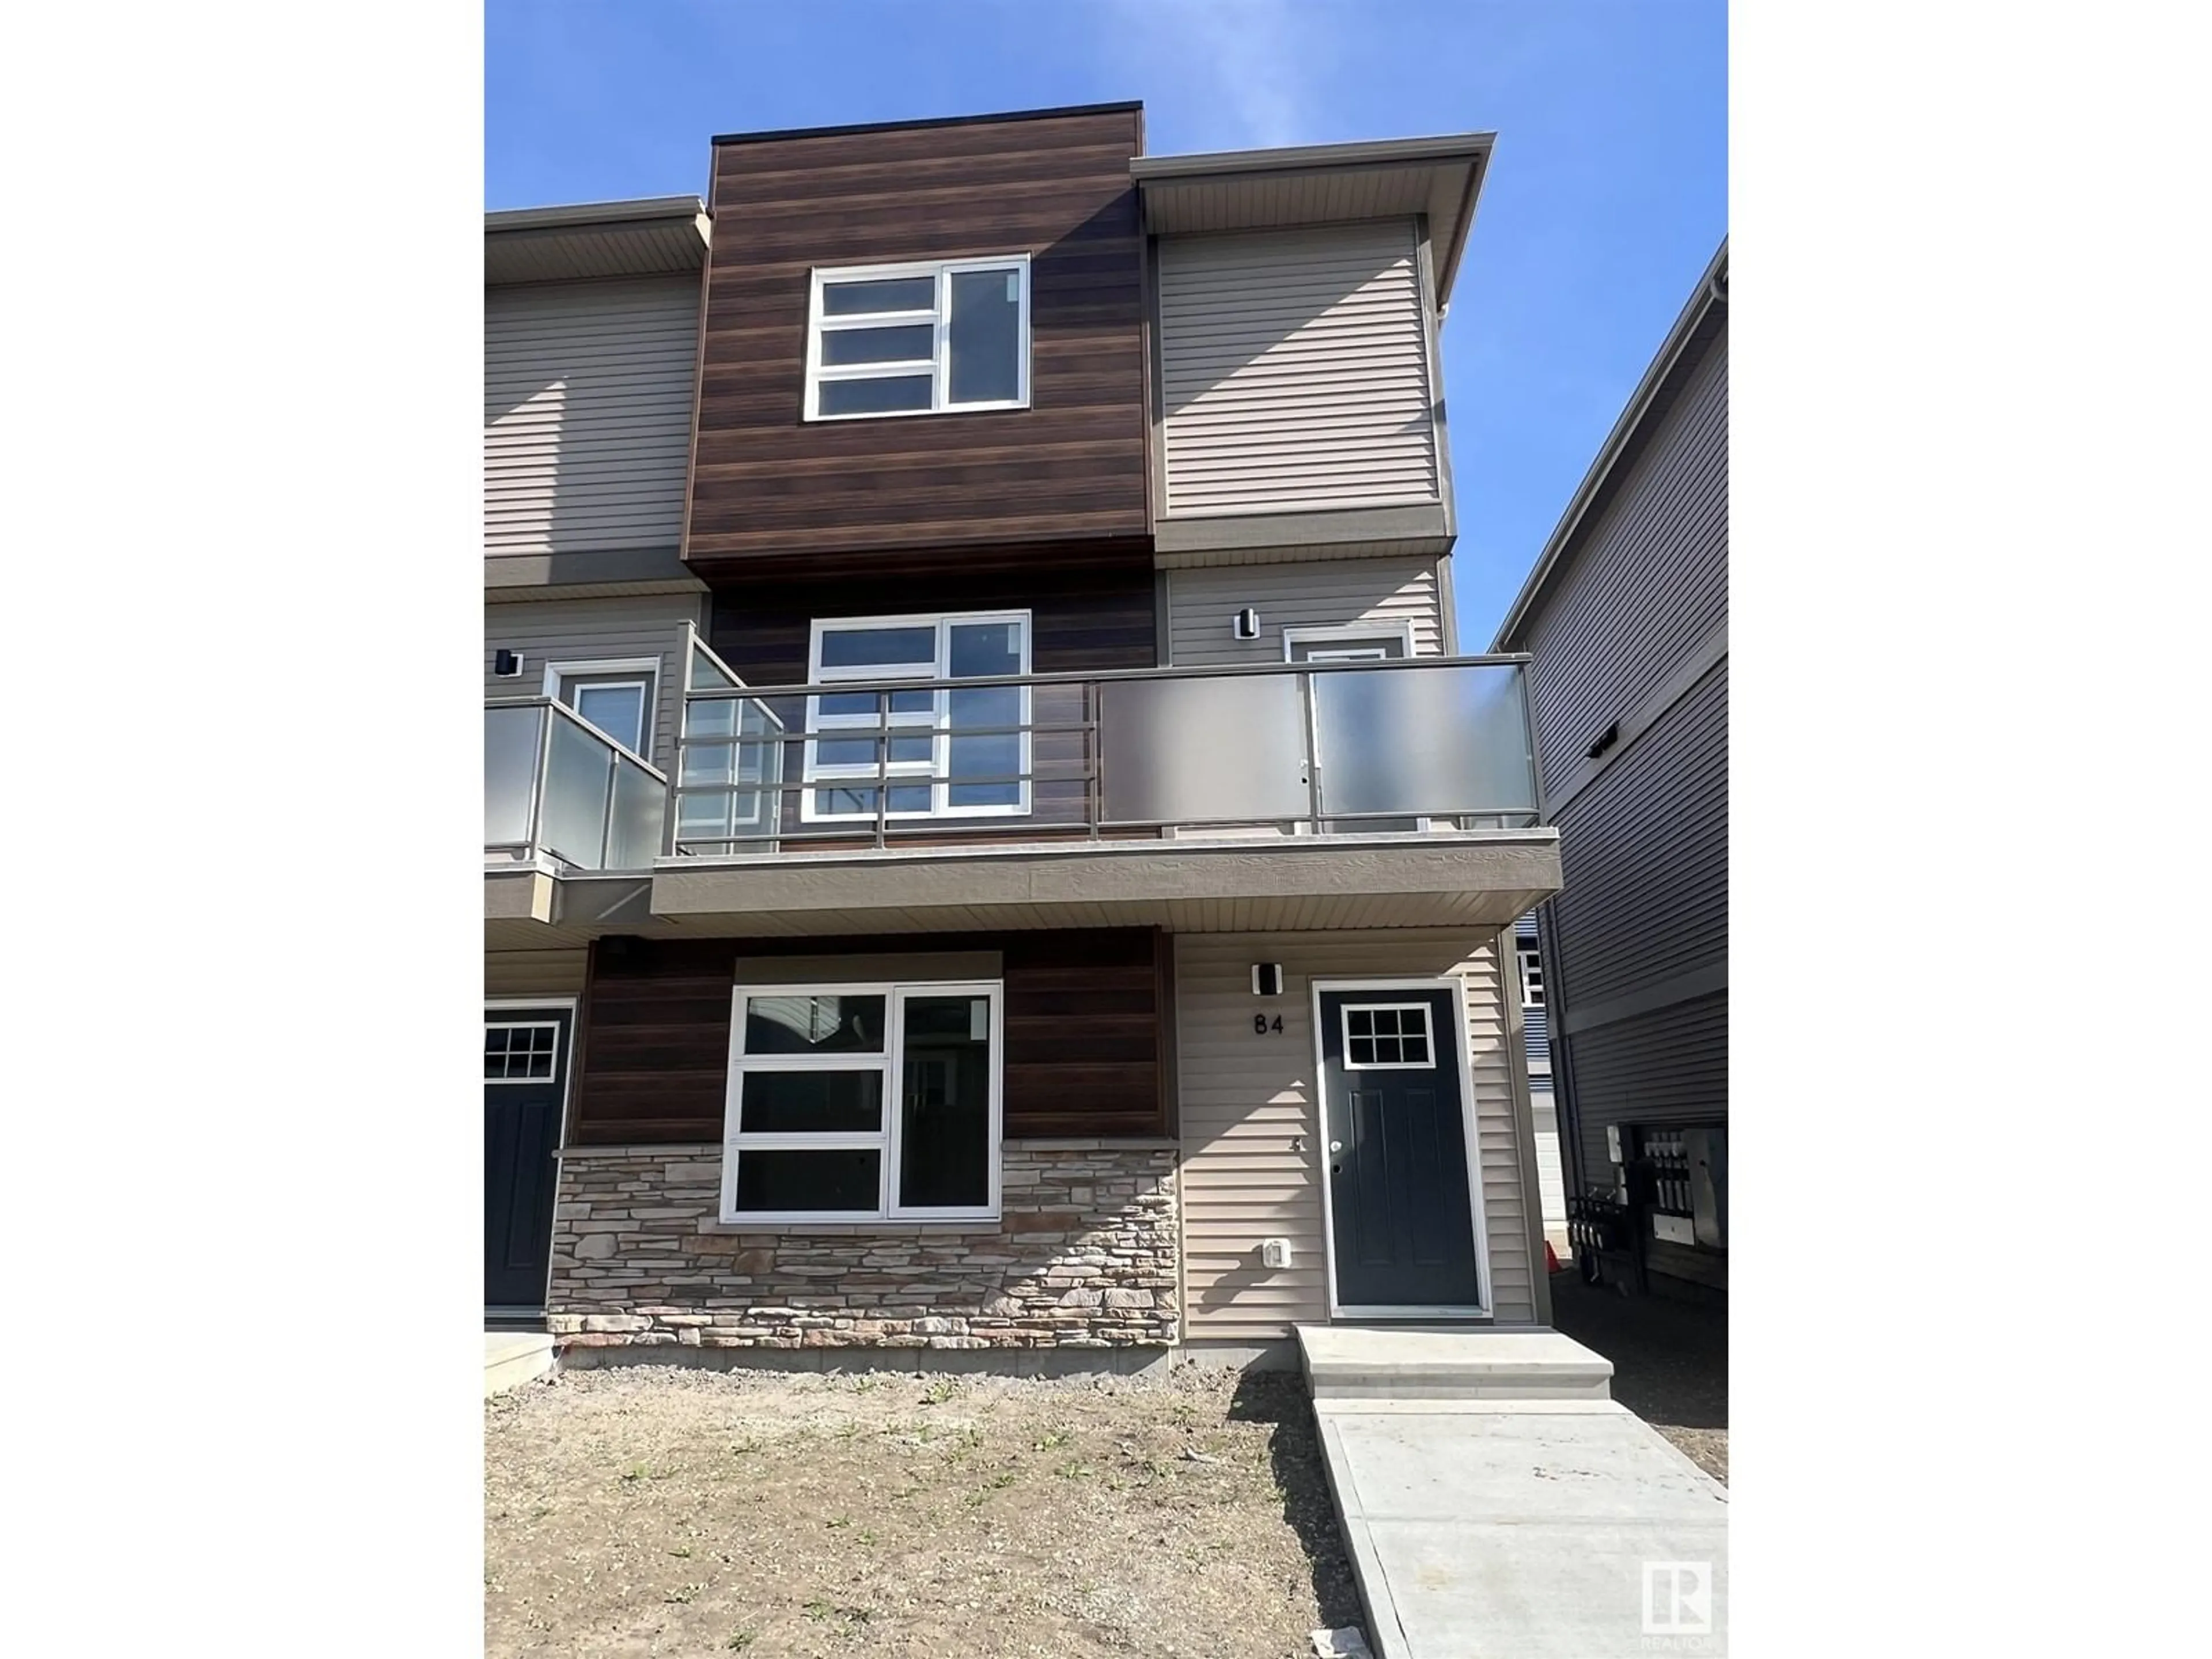 A pic from exterior of the house or condo for #84 17635 58 ST NW, Edmonton Alberta T5Y4C2